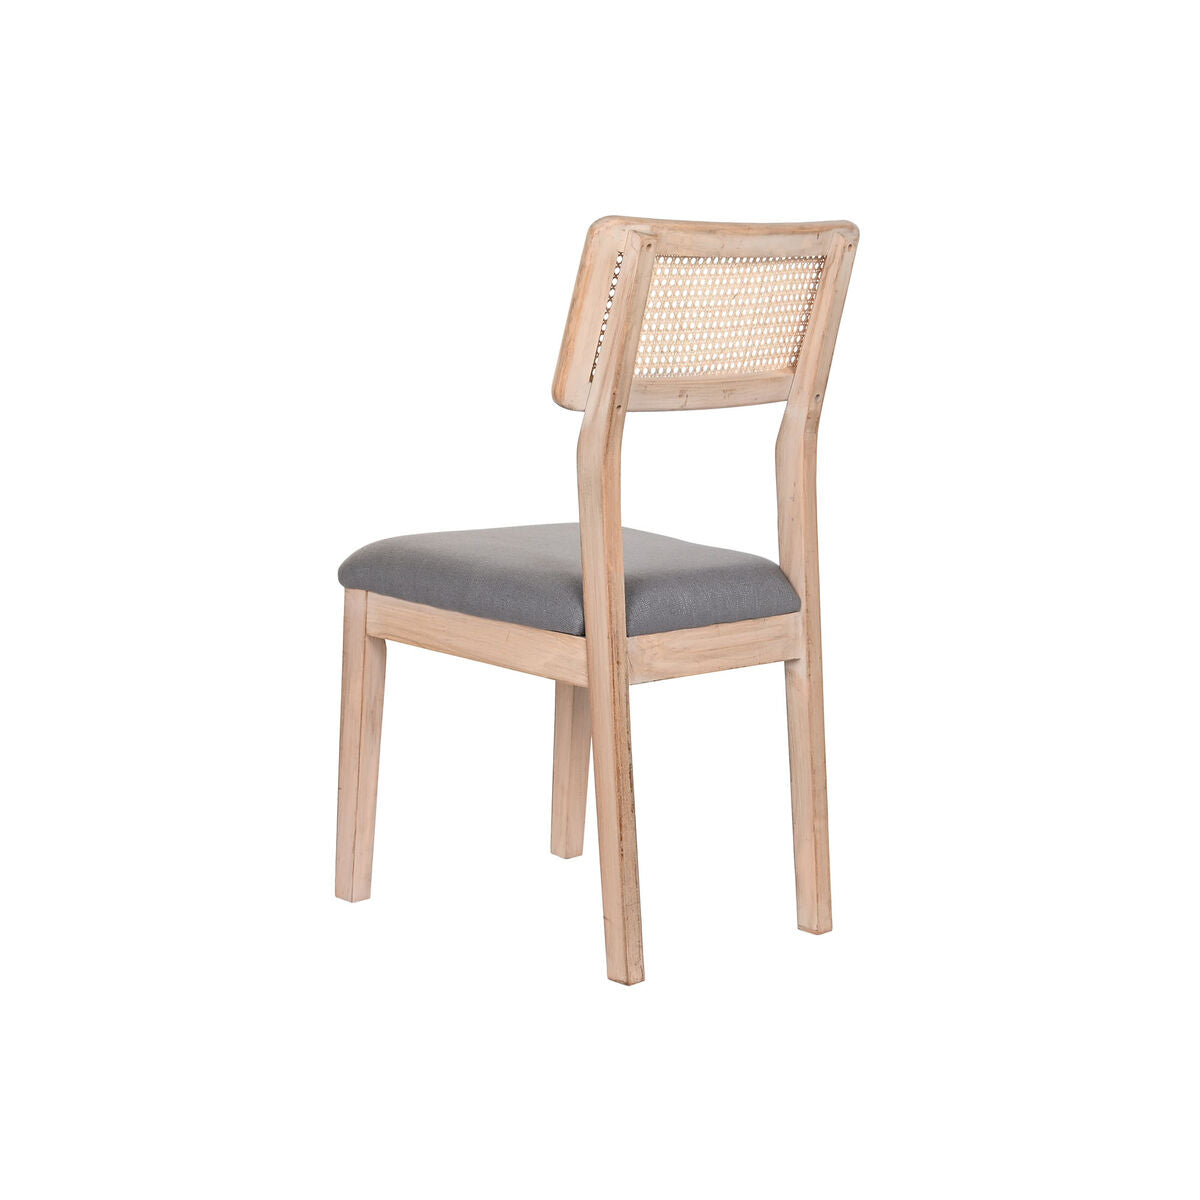 Dark Grey Dining Chair in Wood and Rattan (46 x 53 x 90 cm)